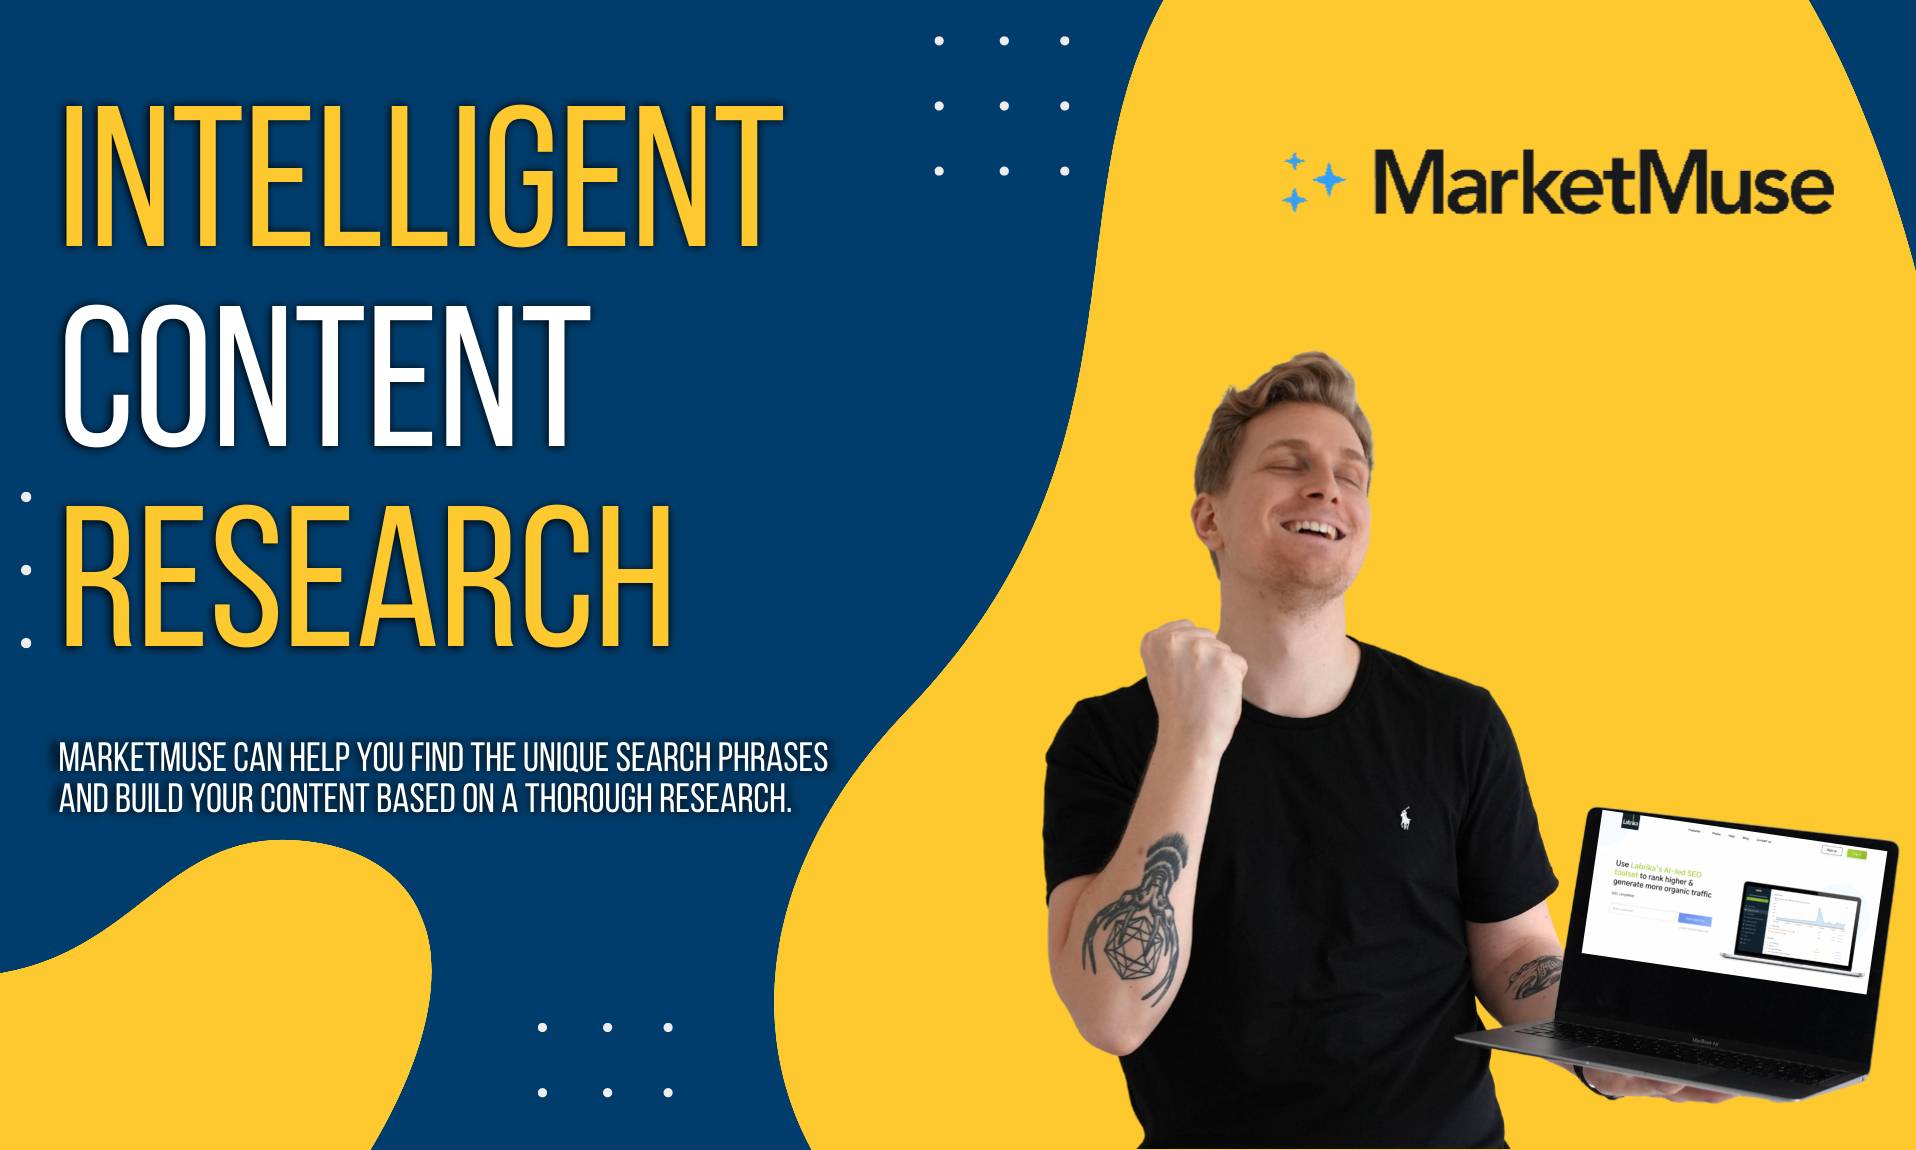 MarketMuse review - Premium Content Research Tool